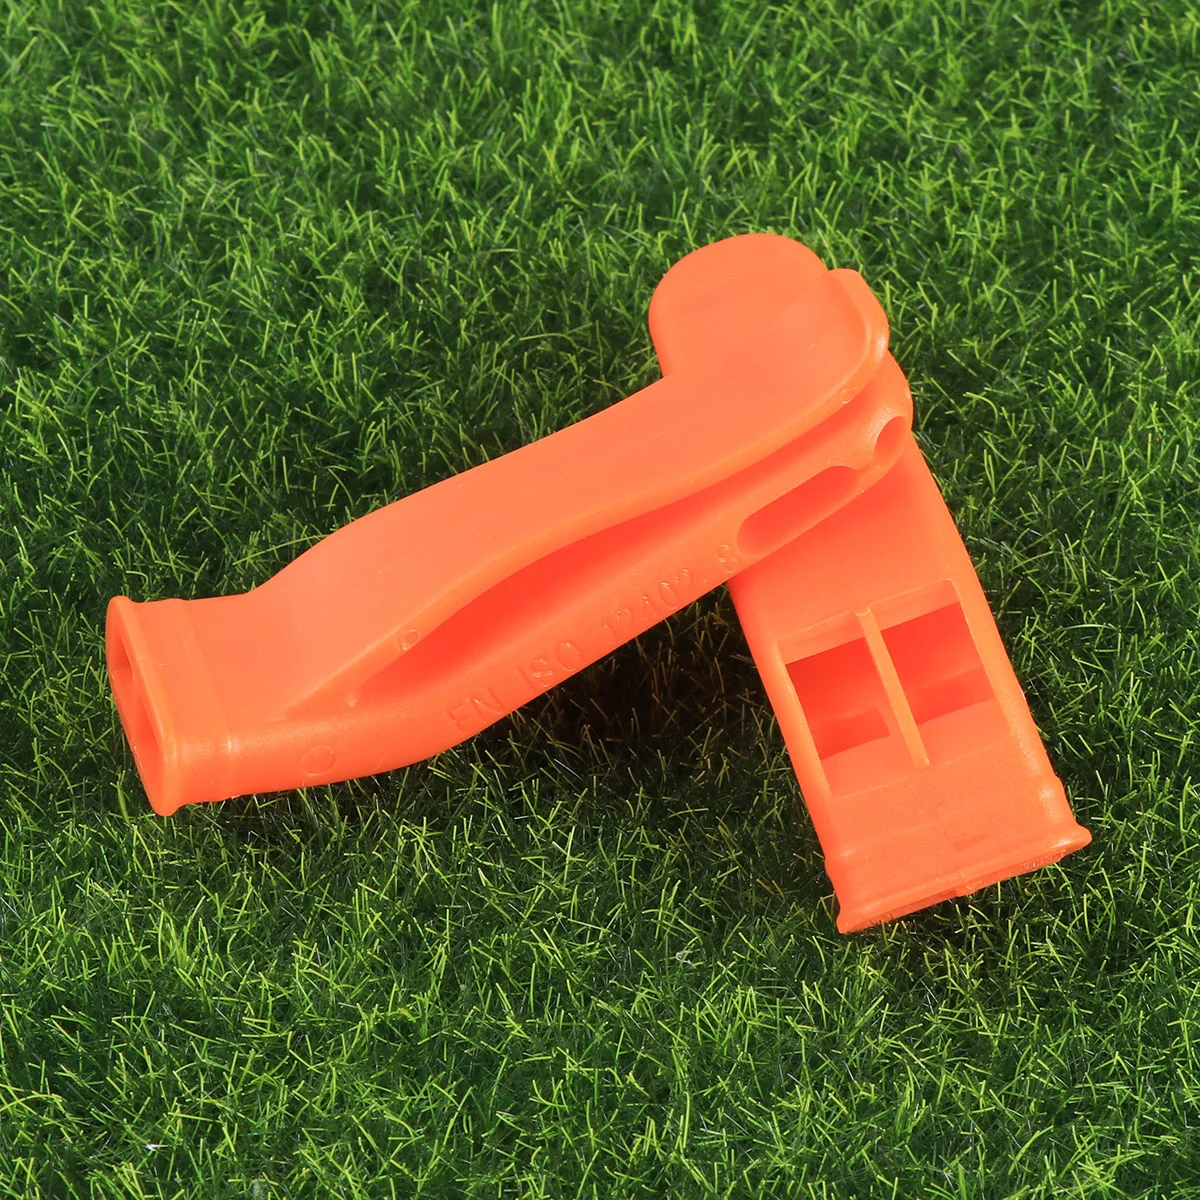 

18pcs Referee Clip Whistle Football Basketball Sports Whistle Training Survival Emergency Whistle for Outdoor (Orange)